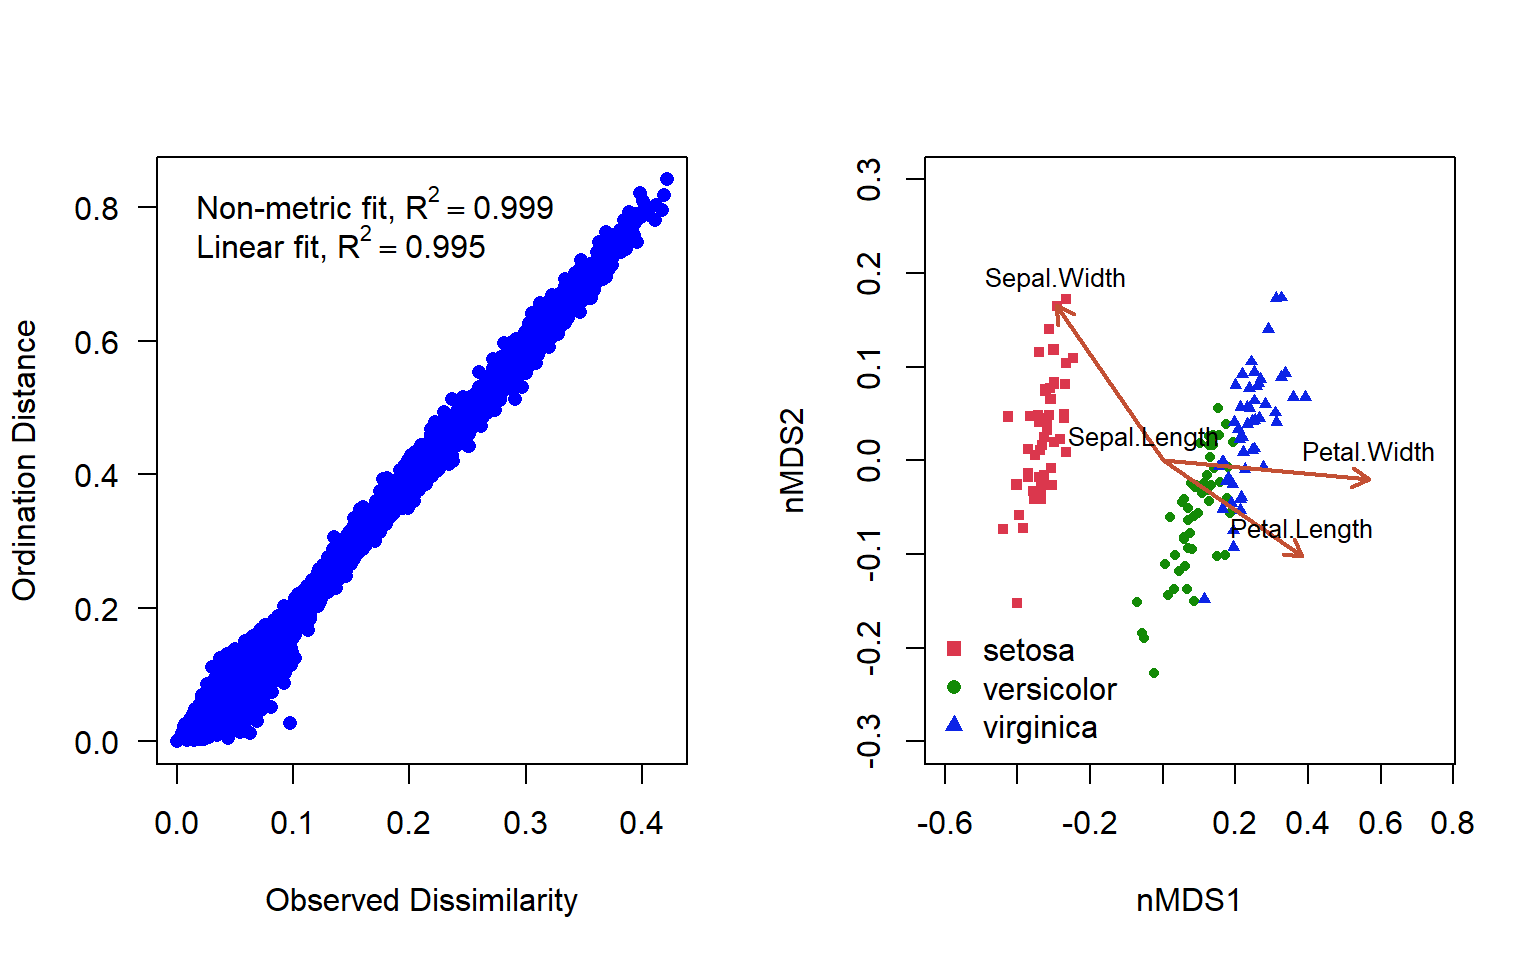 Two plots: the left plot has x-axis labelled 'Observed Dissimilarity' and a y-axis labelled 'Ordination Distance', with a cluster of points that trend upwards, the right plot has x-axis labelled 'nMDS1' and y-axis labelled 'nMDS2' with three clusters of points and 4 arrows originating from the center